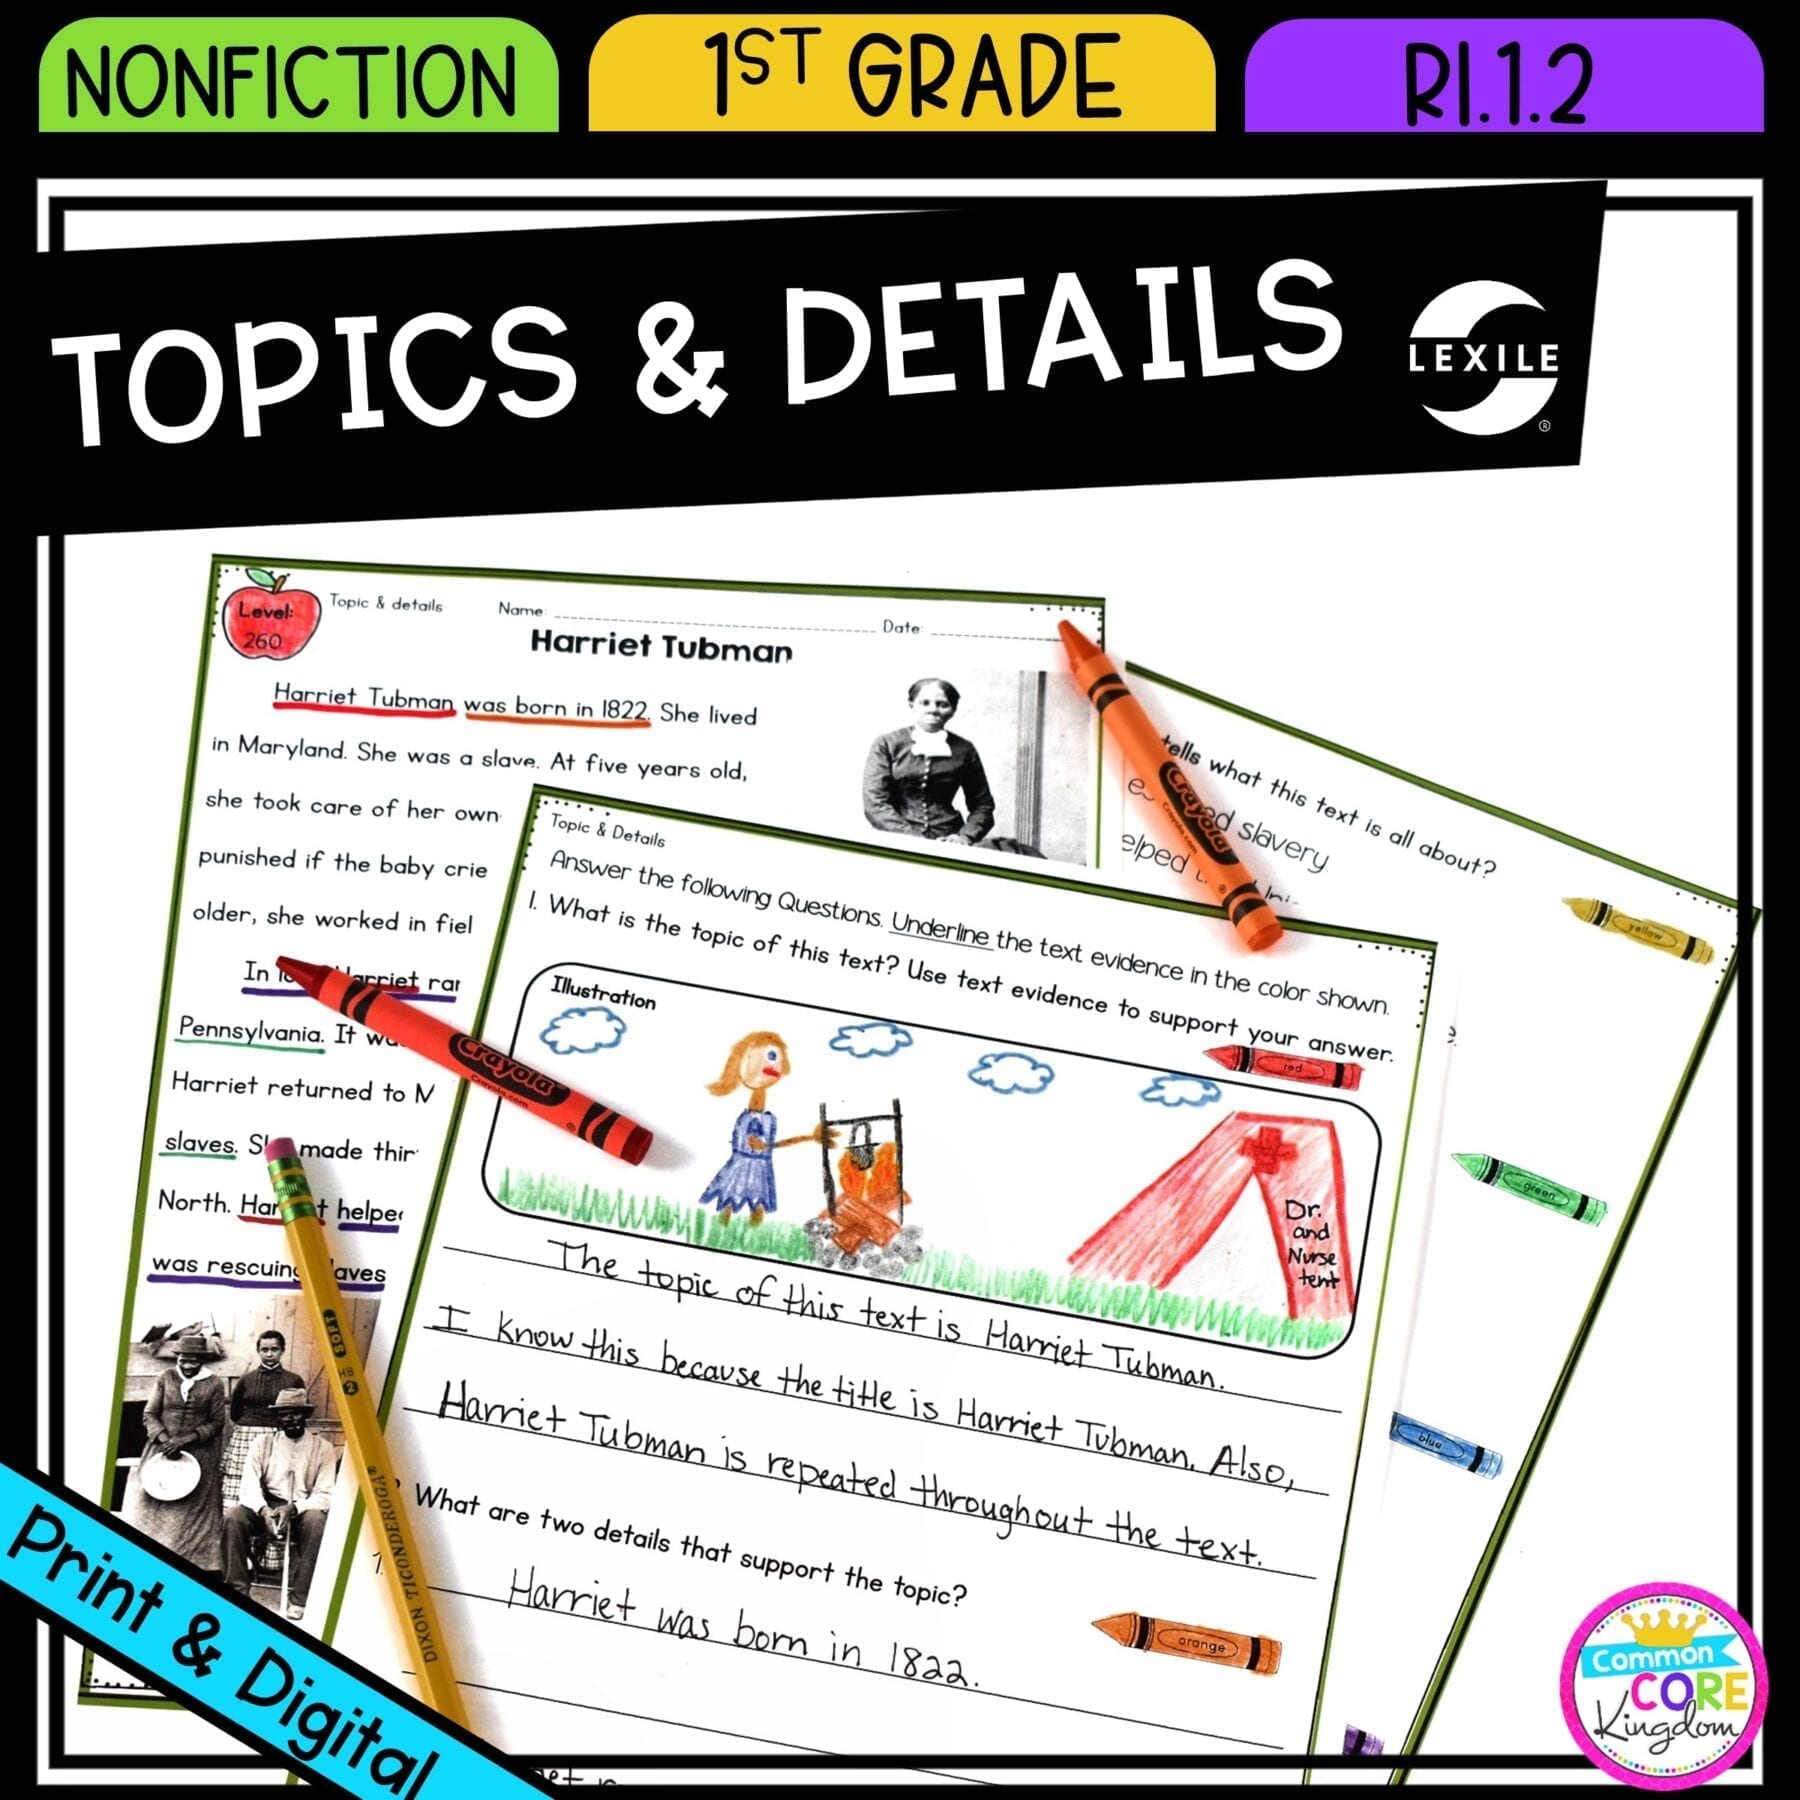 Main Topic & Details in Nonfiction for 1st grade cover showing printable and digital worksheets